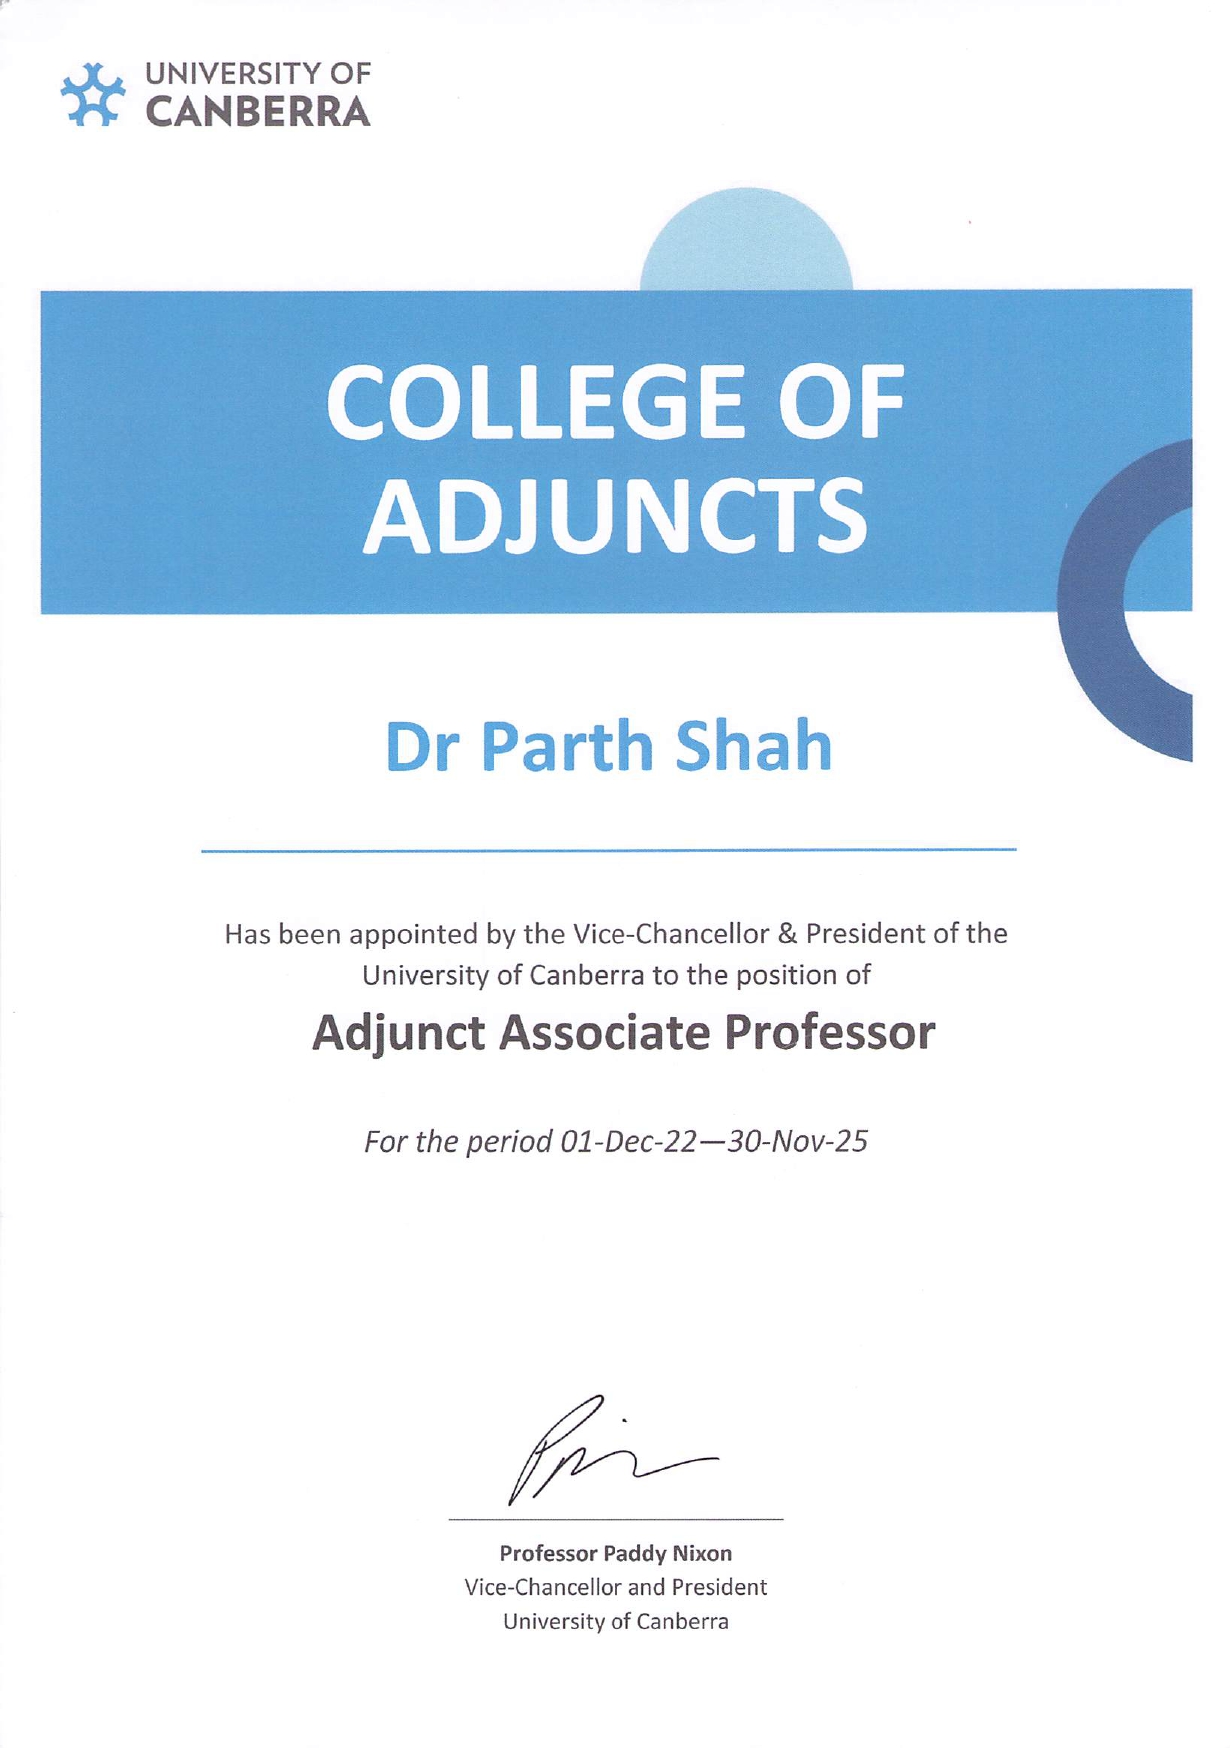 Dr Parth Shah appointed as Adjunct Associate Professor at University of